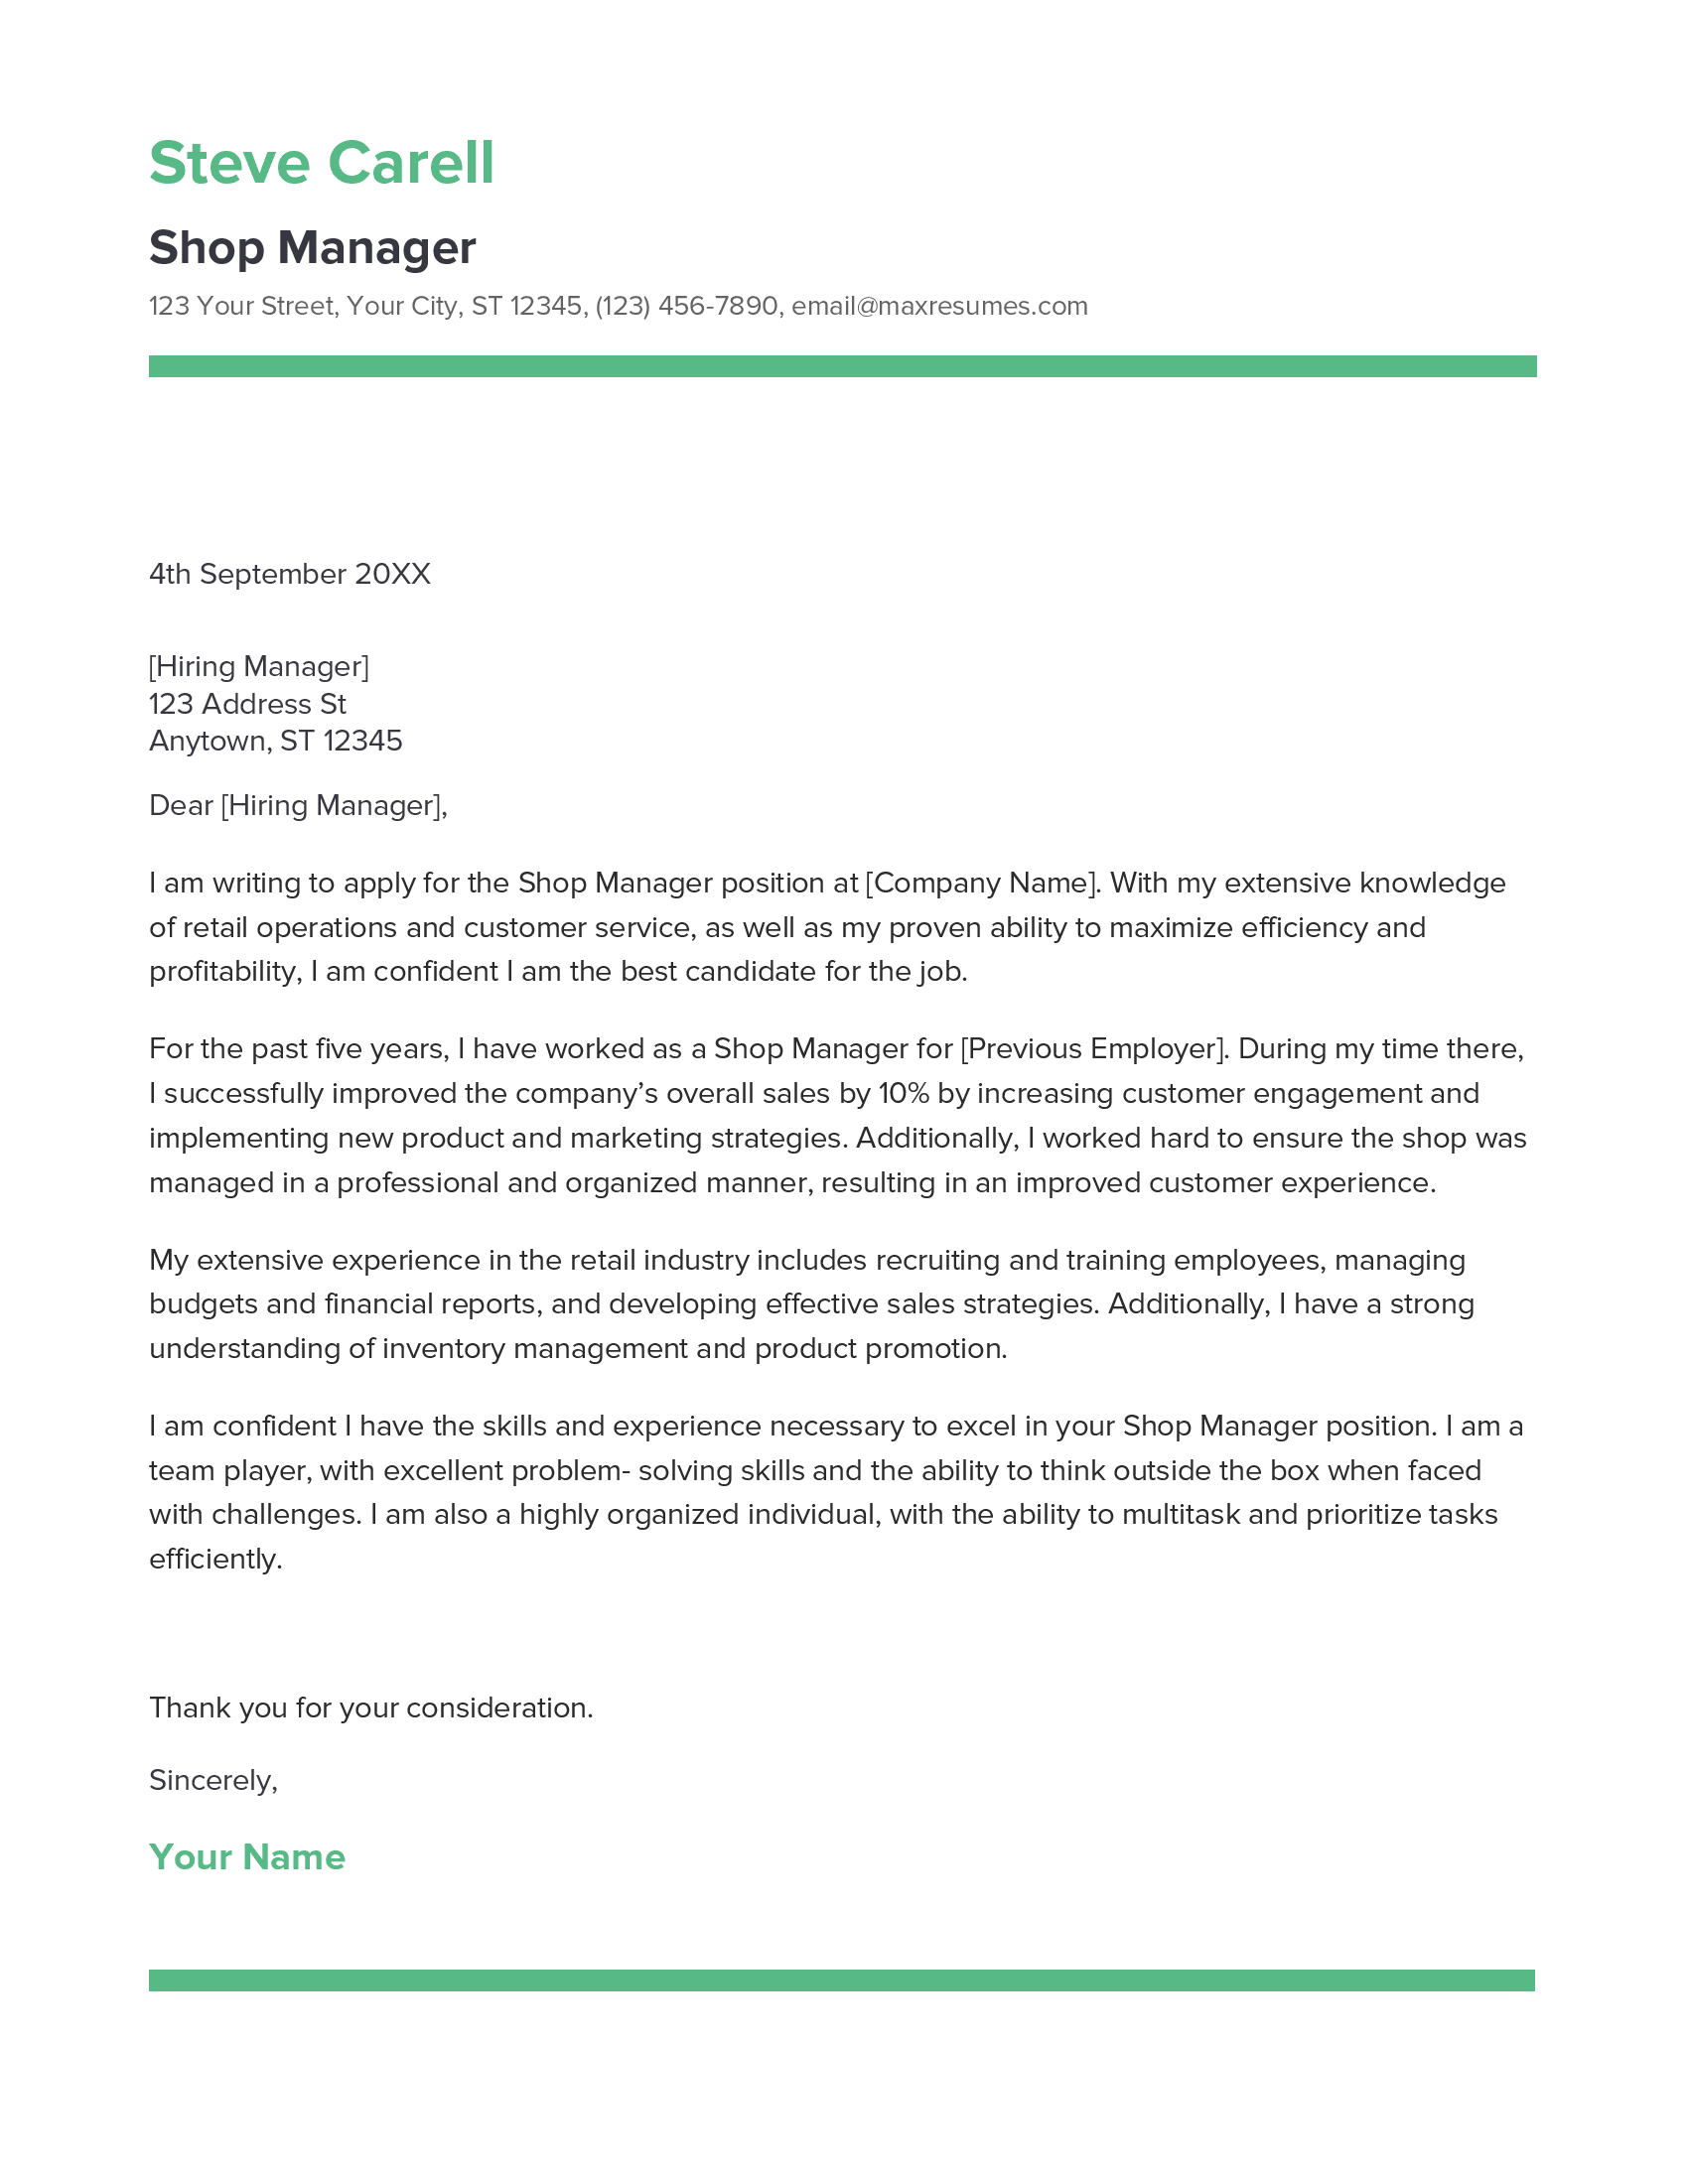 Shop Manager Cover Letter Example